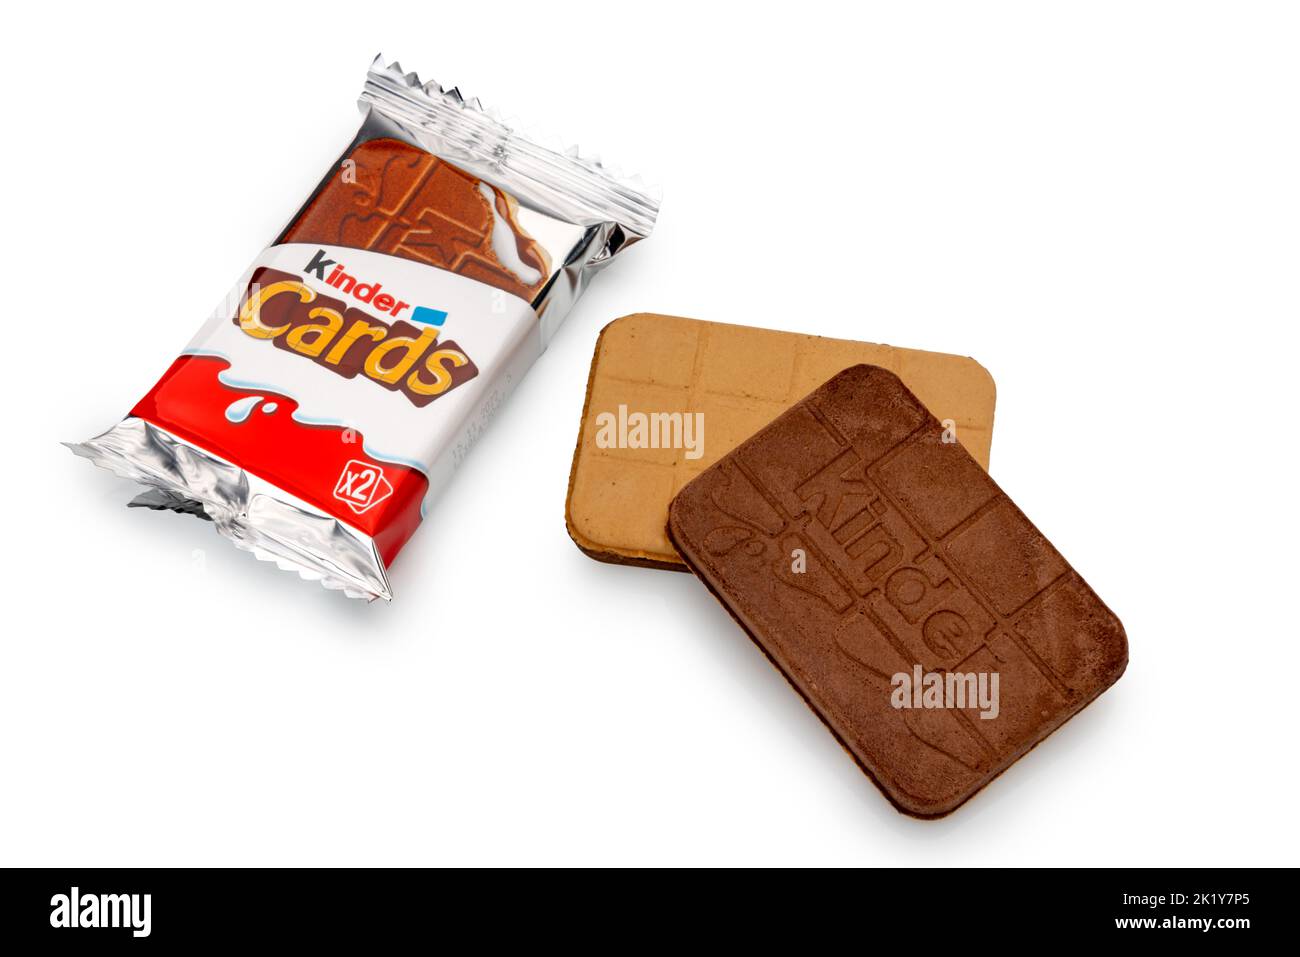 Alba, Italy - September 19, 2022: Kinder Cards: thin waffle biscuits filled with milk chocolate produced by Ferrero. Packaging with front and back coo Stock Photo